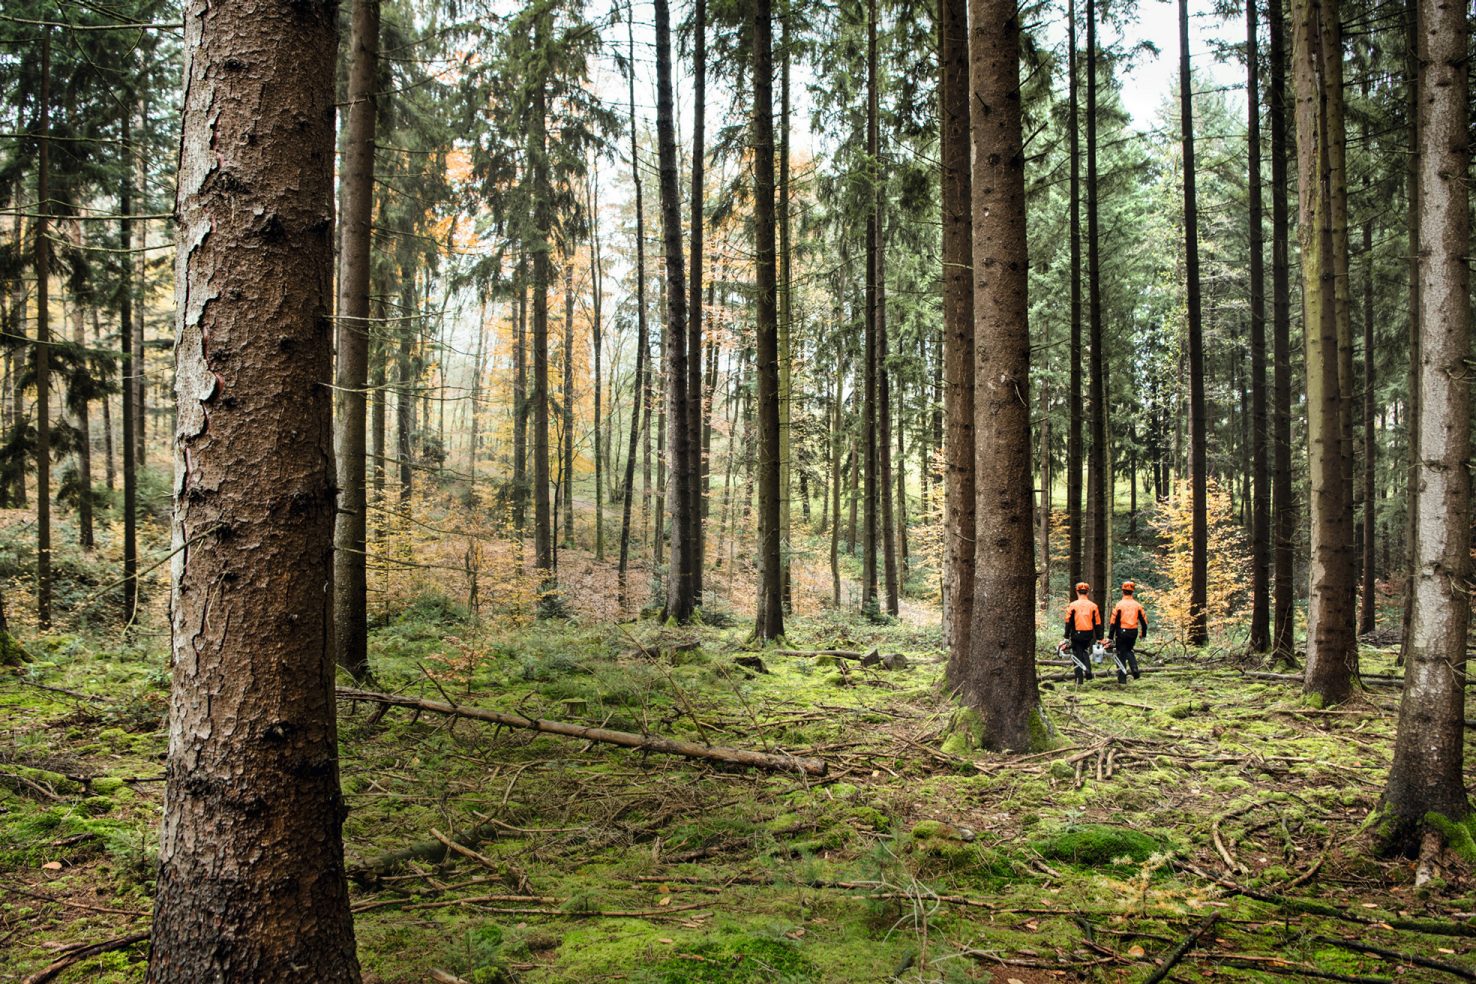 Two forest workers in a coniferous forest